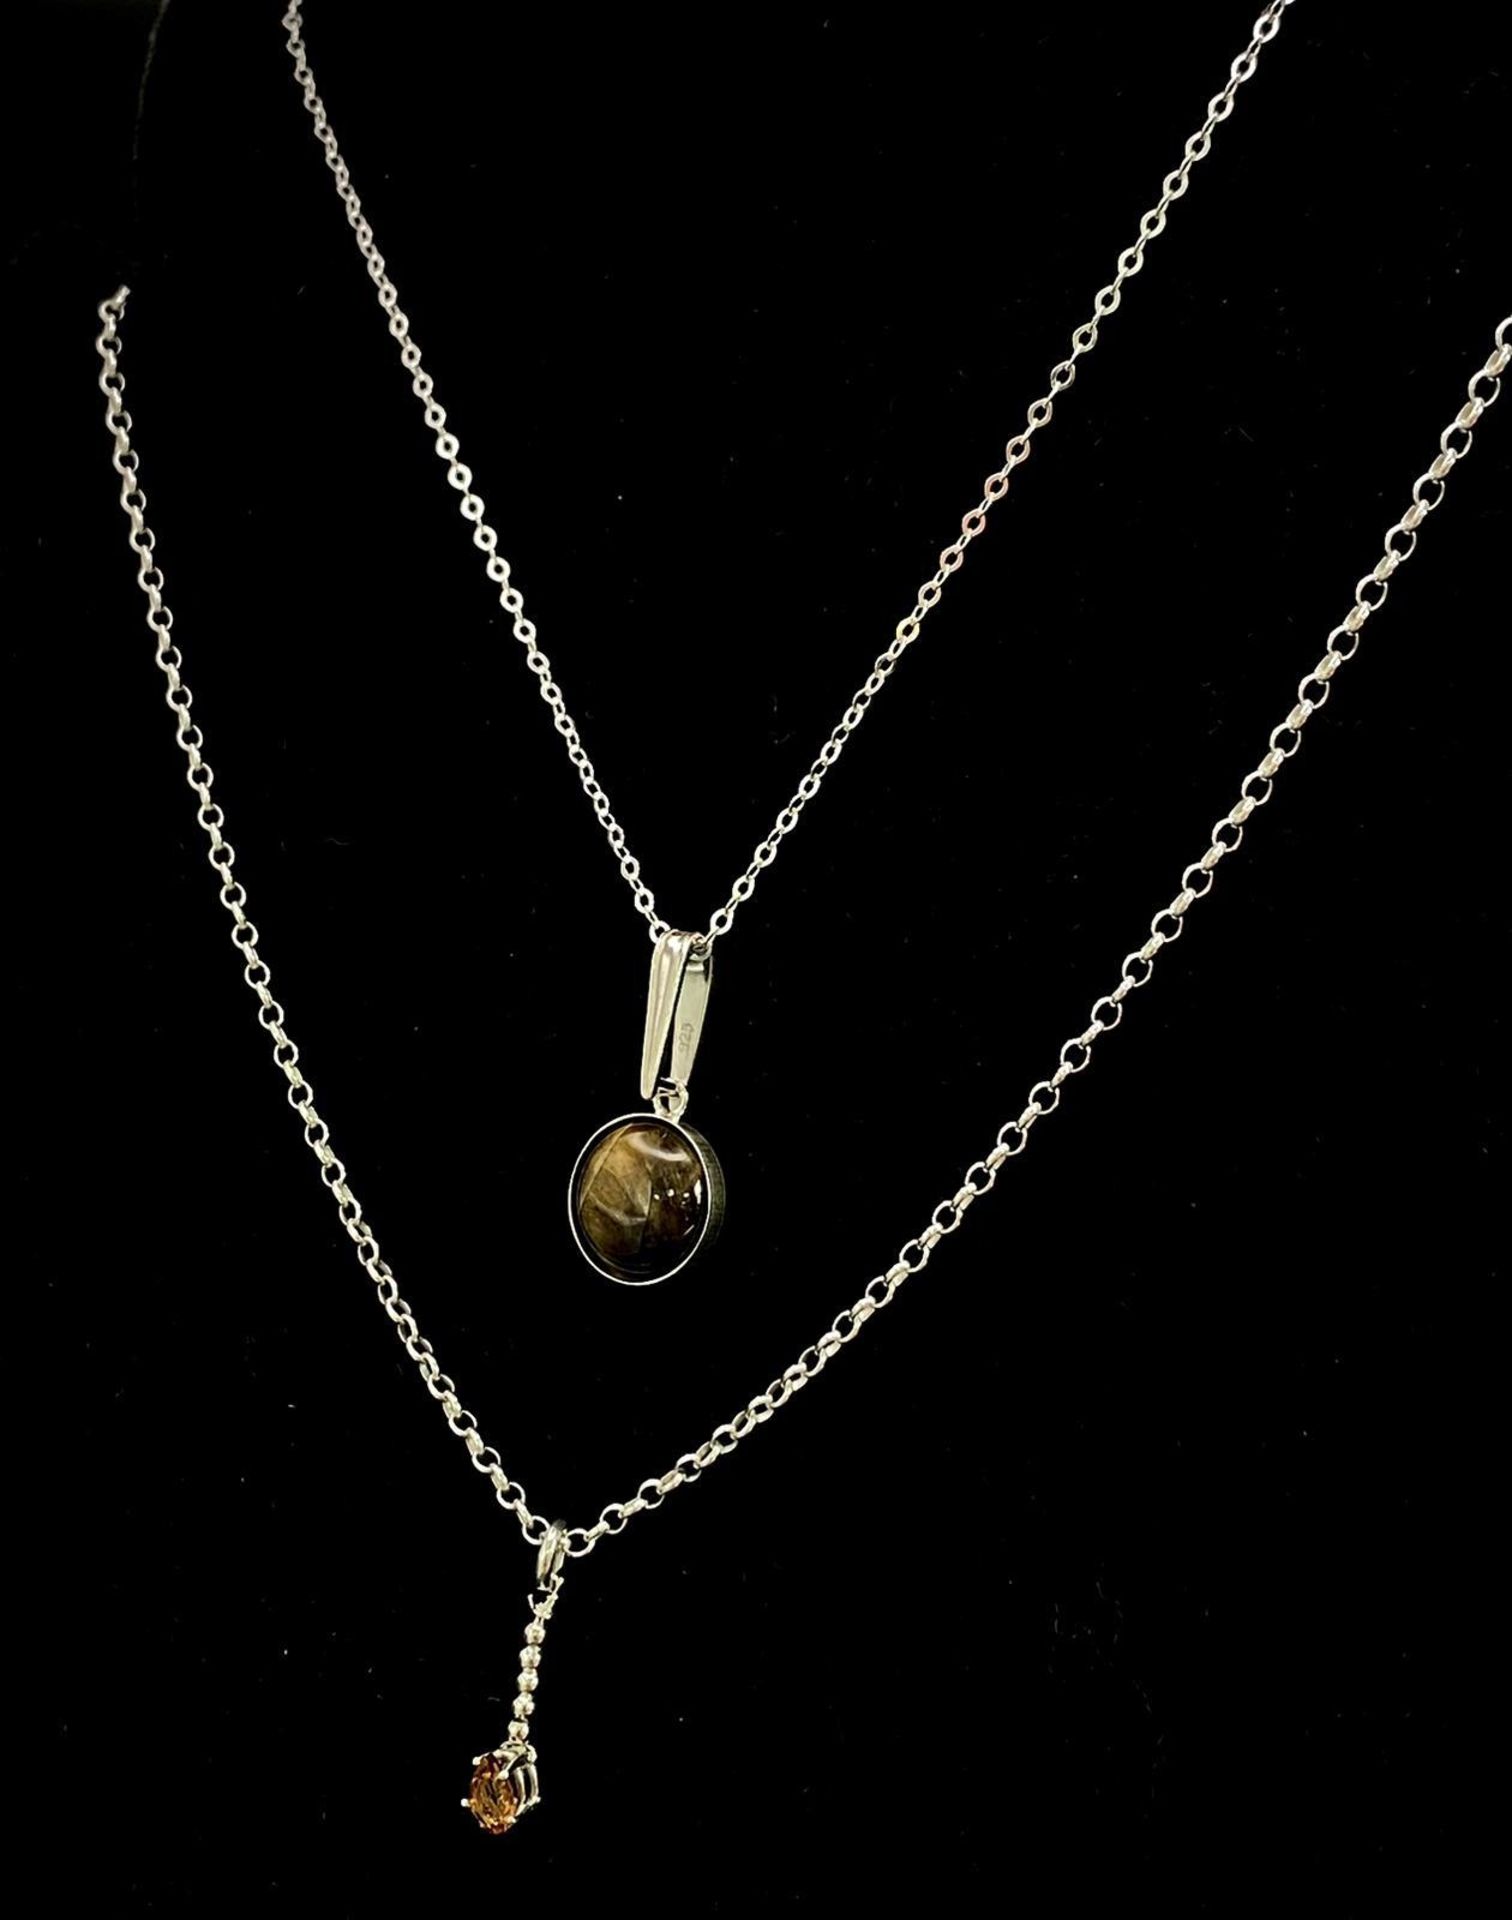 Two Sterling Silver Necklaces with Gemstone pendants. Both measuring 40cm in length, both